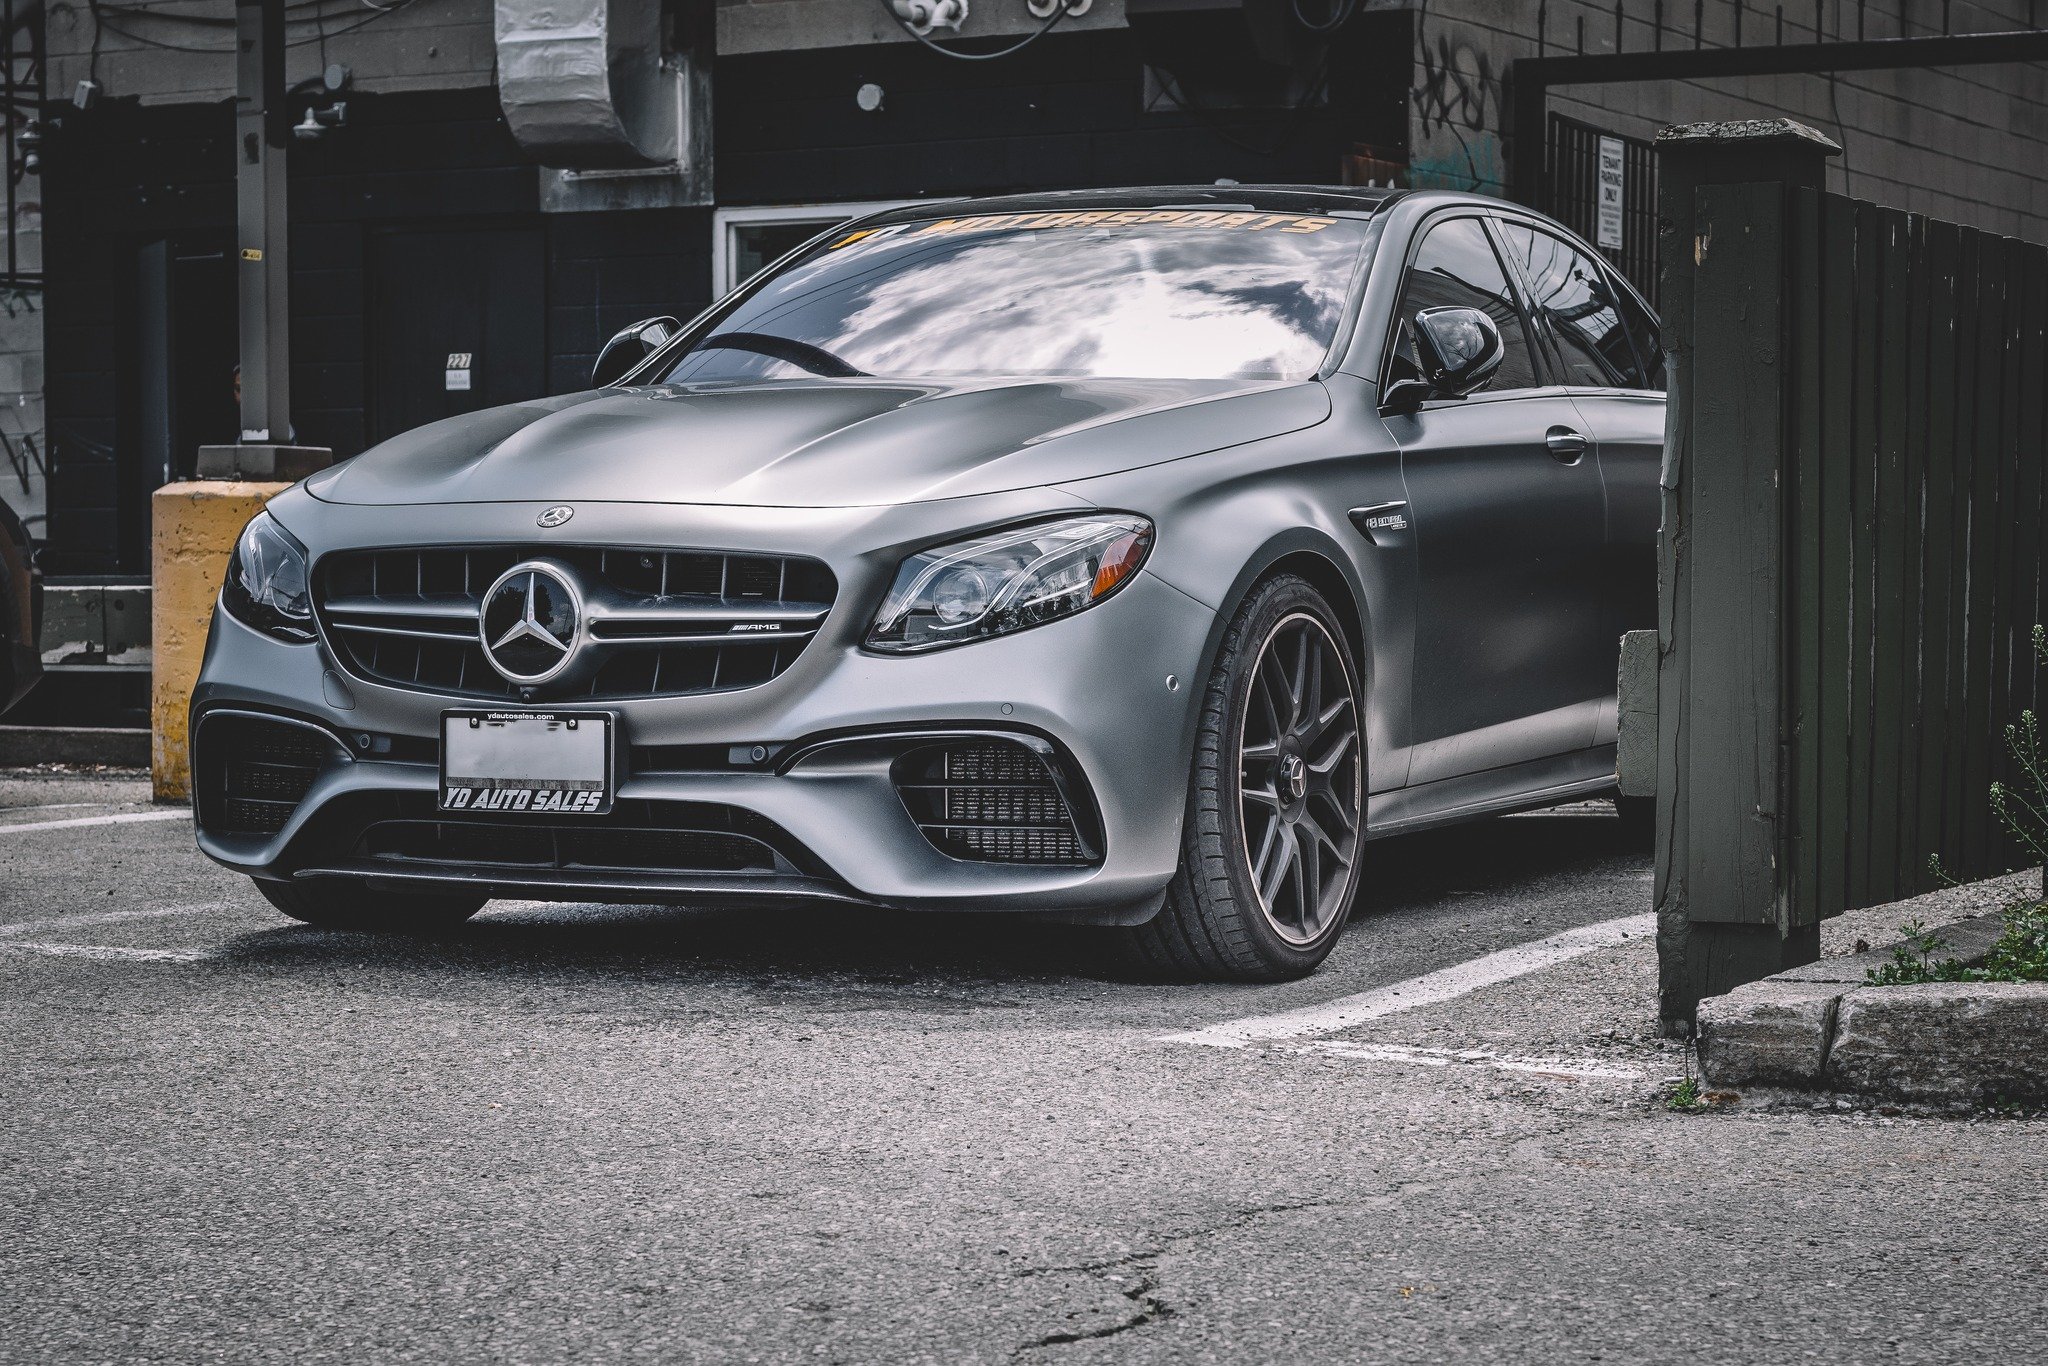 Sleek, stealthy, and ready to pounce. This Mercedes isn't just a car, it's a statement.
.
.
.
@mercedesamg 
@mercedesbenz 
.
.
.
#mercedes #wrapped #merc #streetphotography #v8biturbo #amg